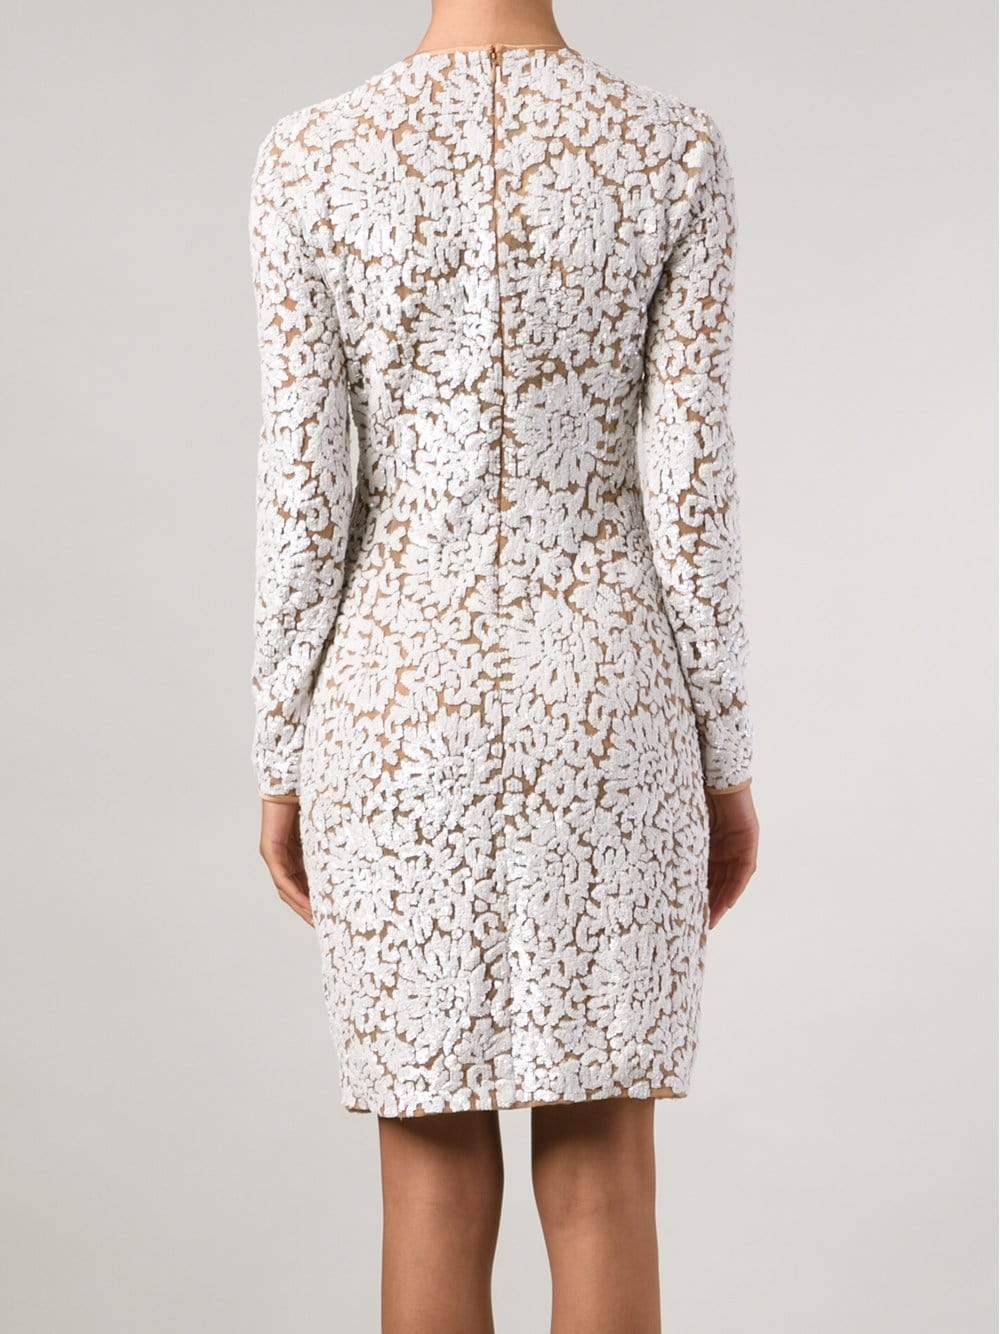 MICHAEL KORS-Lace Embroidered Dress-WHT/SUN